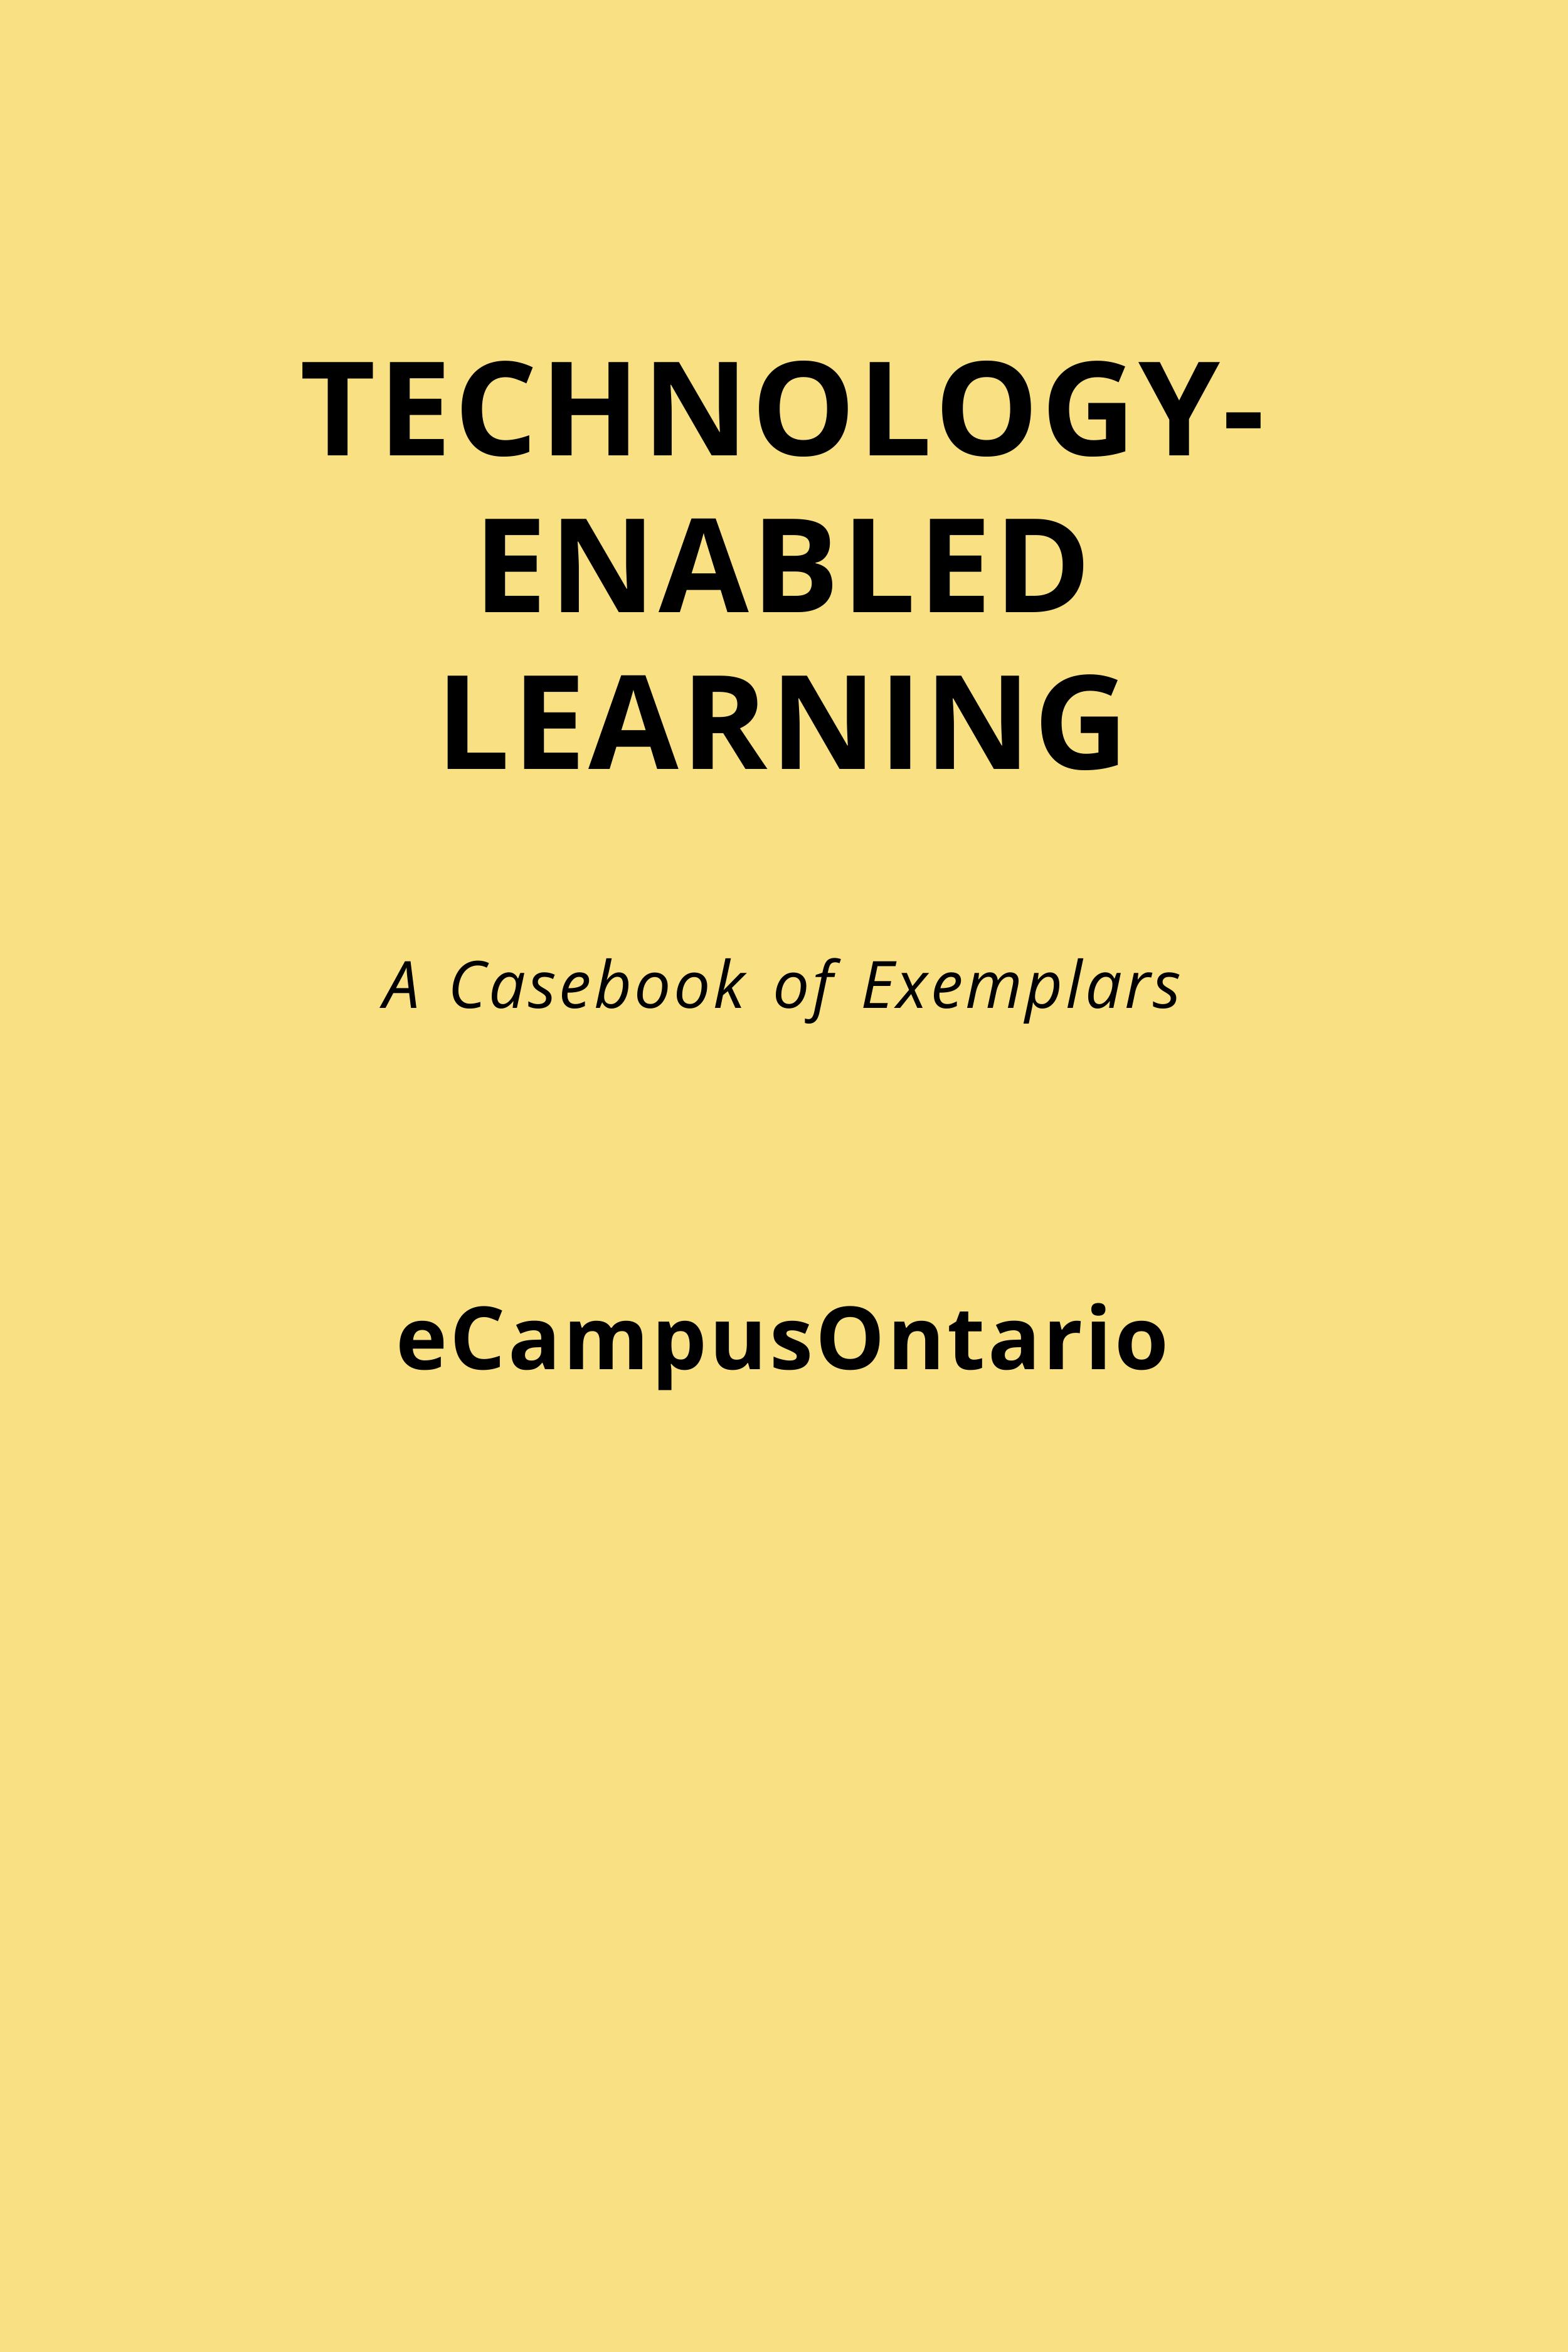 Technology-Enabled Learning  book cover